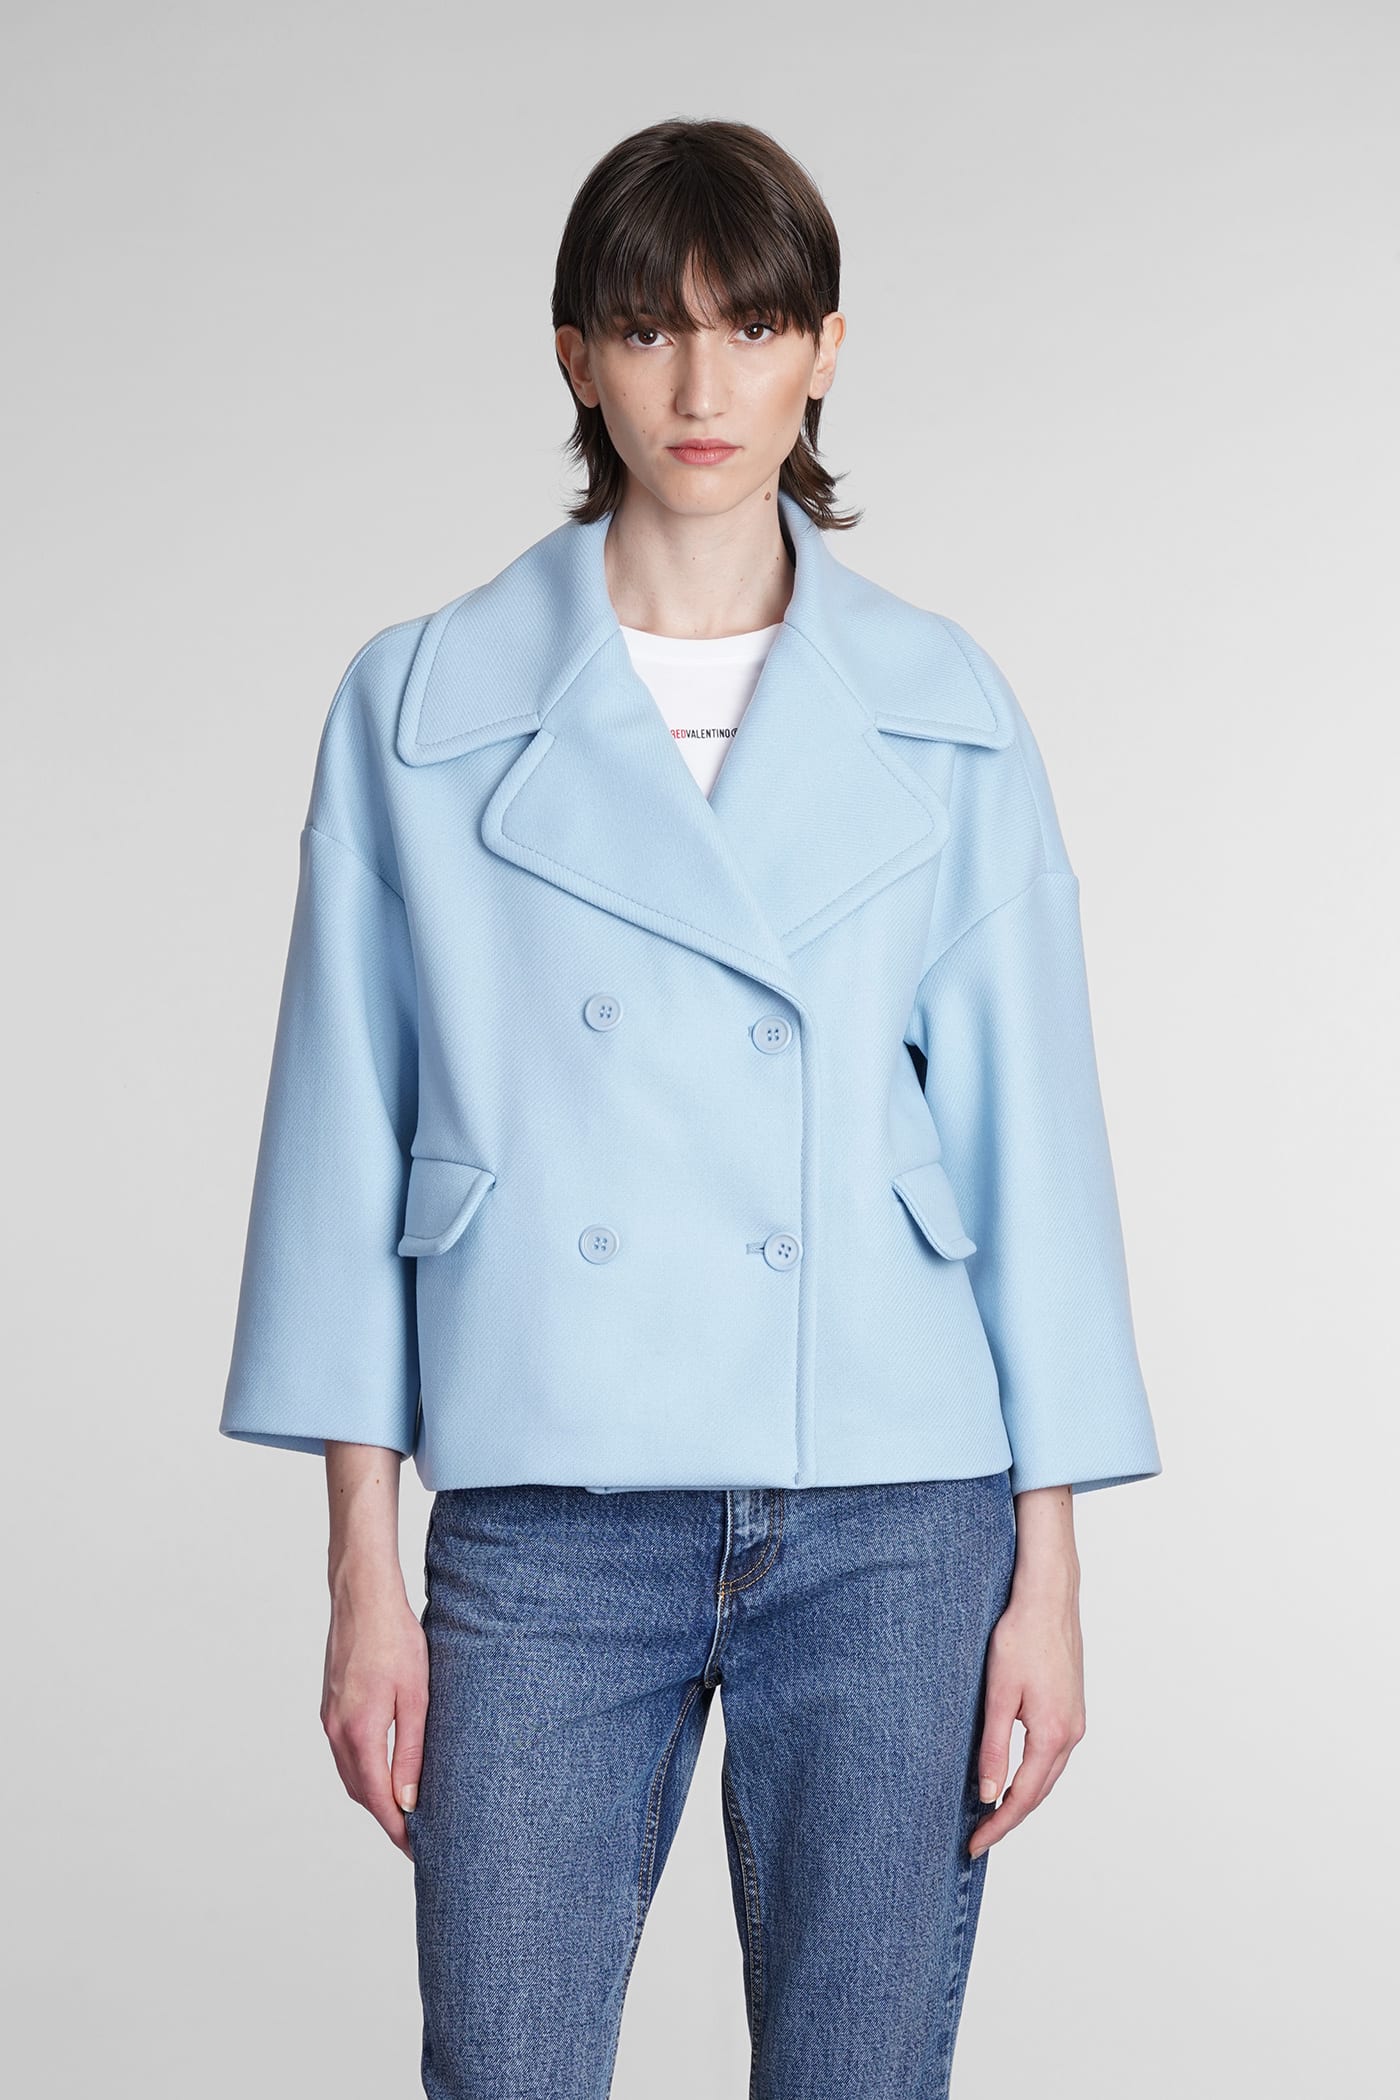 RED Valentino Coat In Cyan Wool